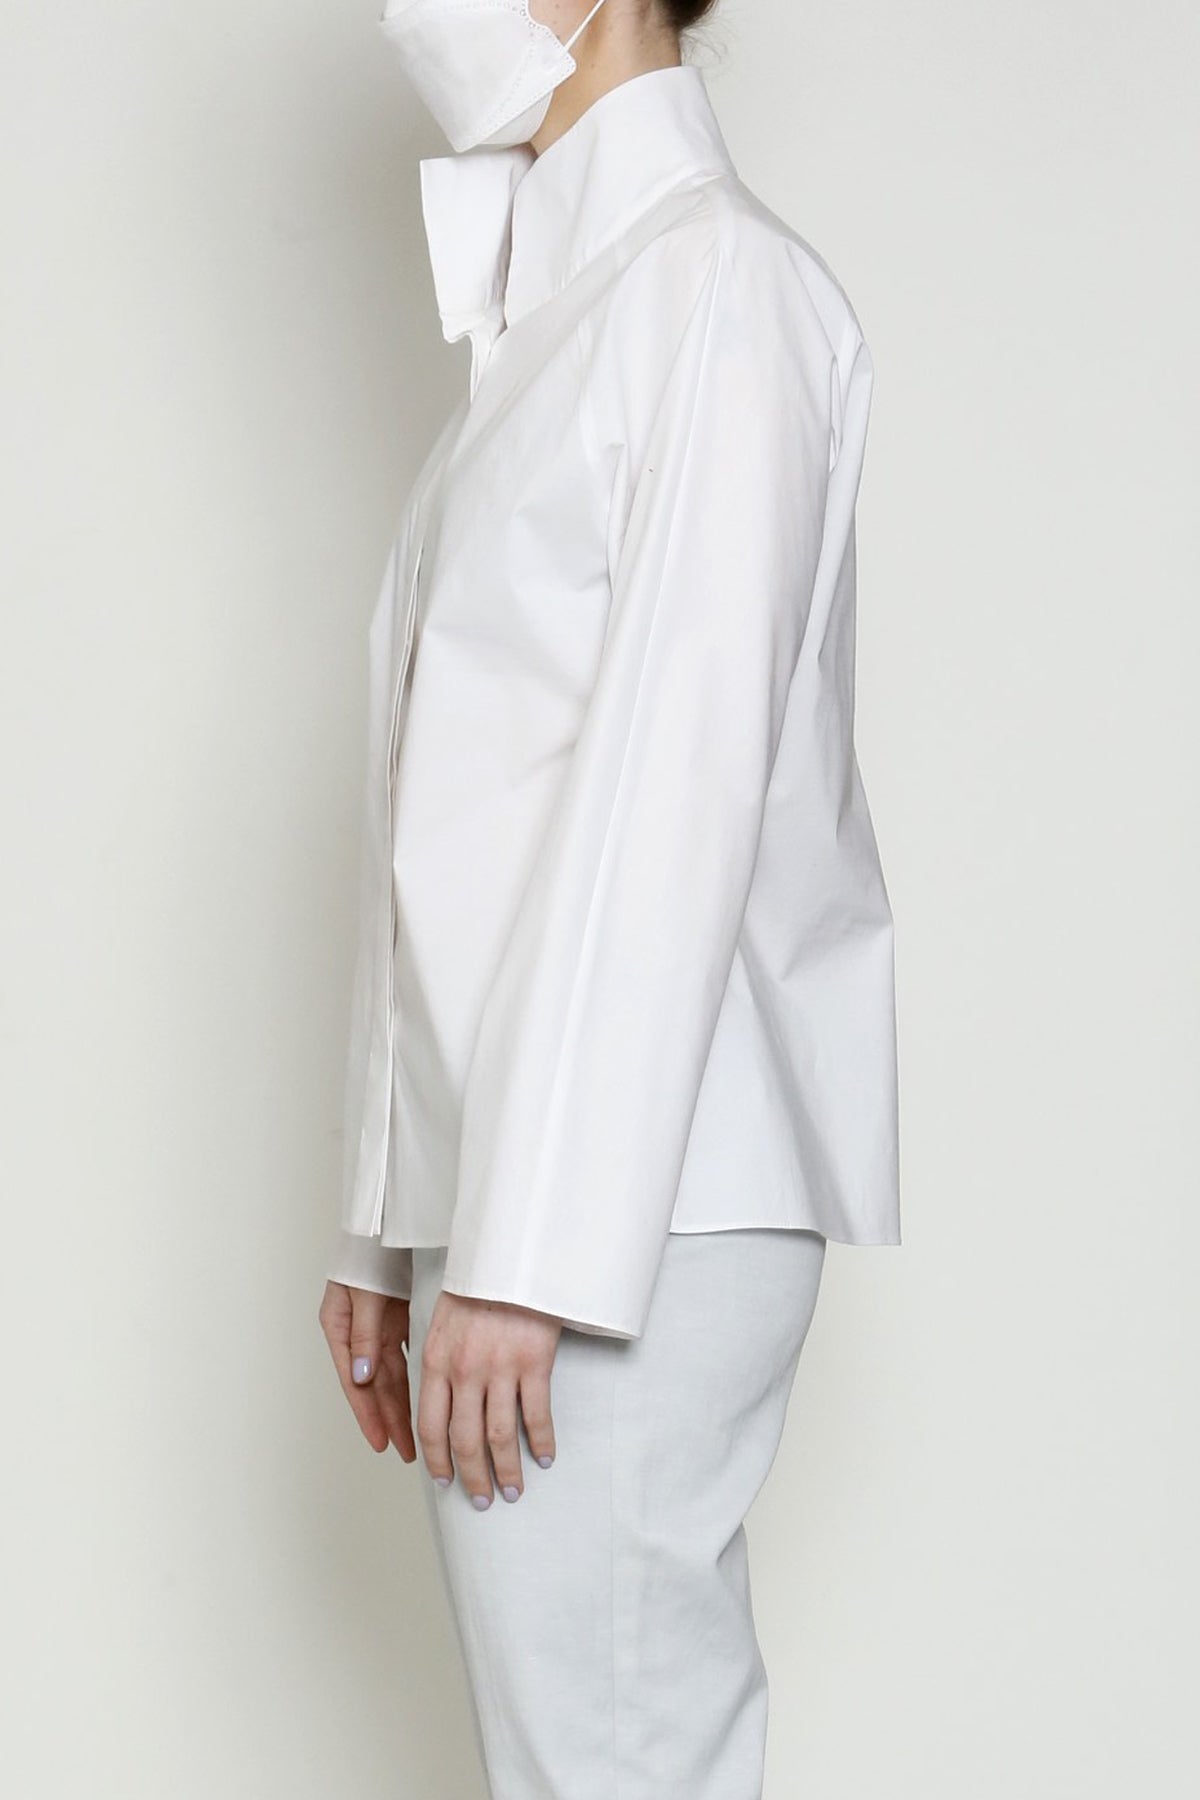 The Zoom Blouse in Paper Cotton with Raglan Sleeves and a High Collar - 3